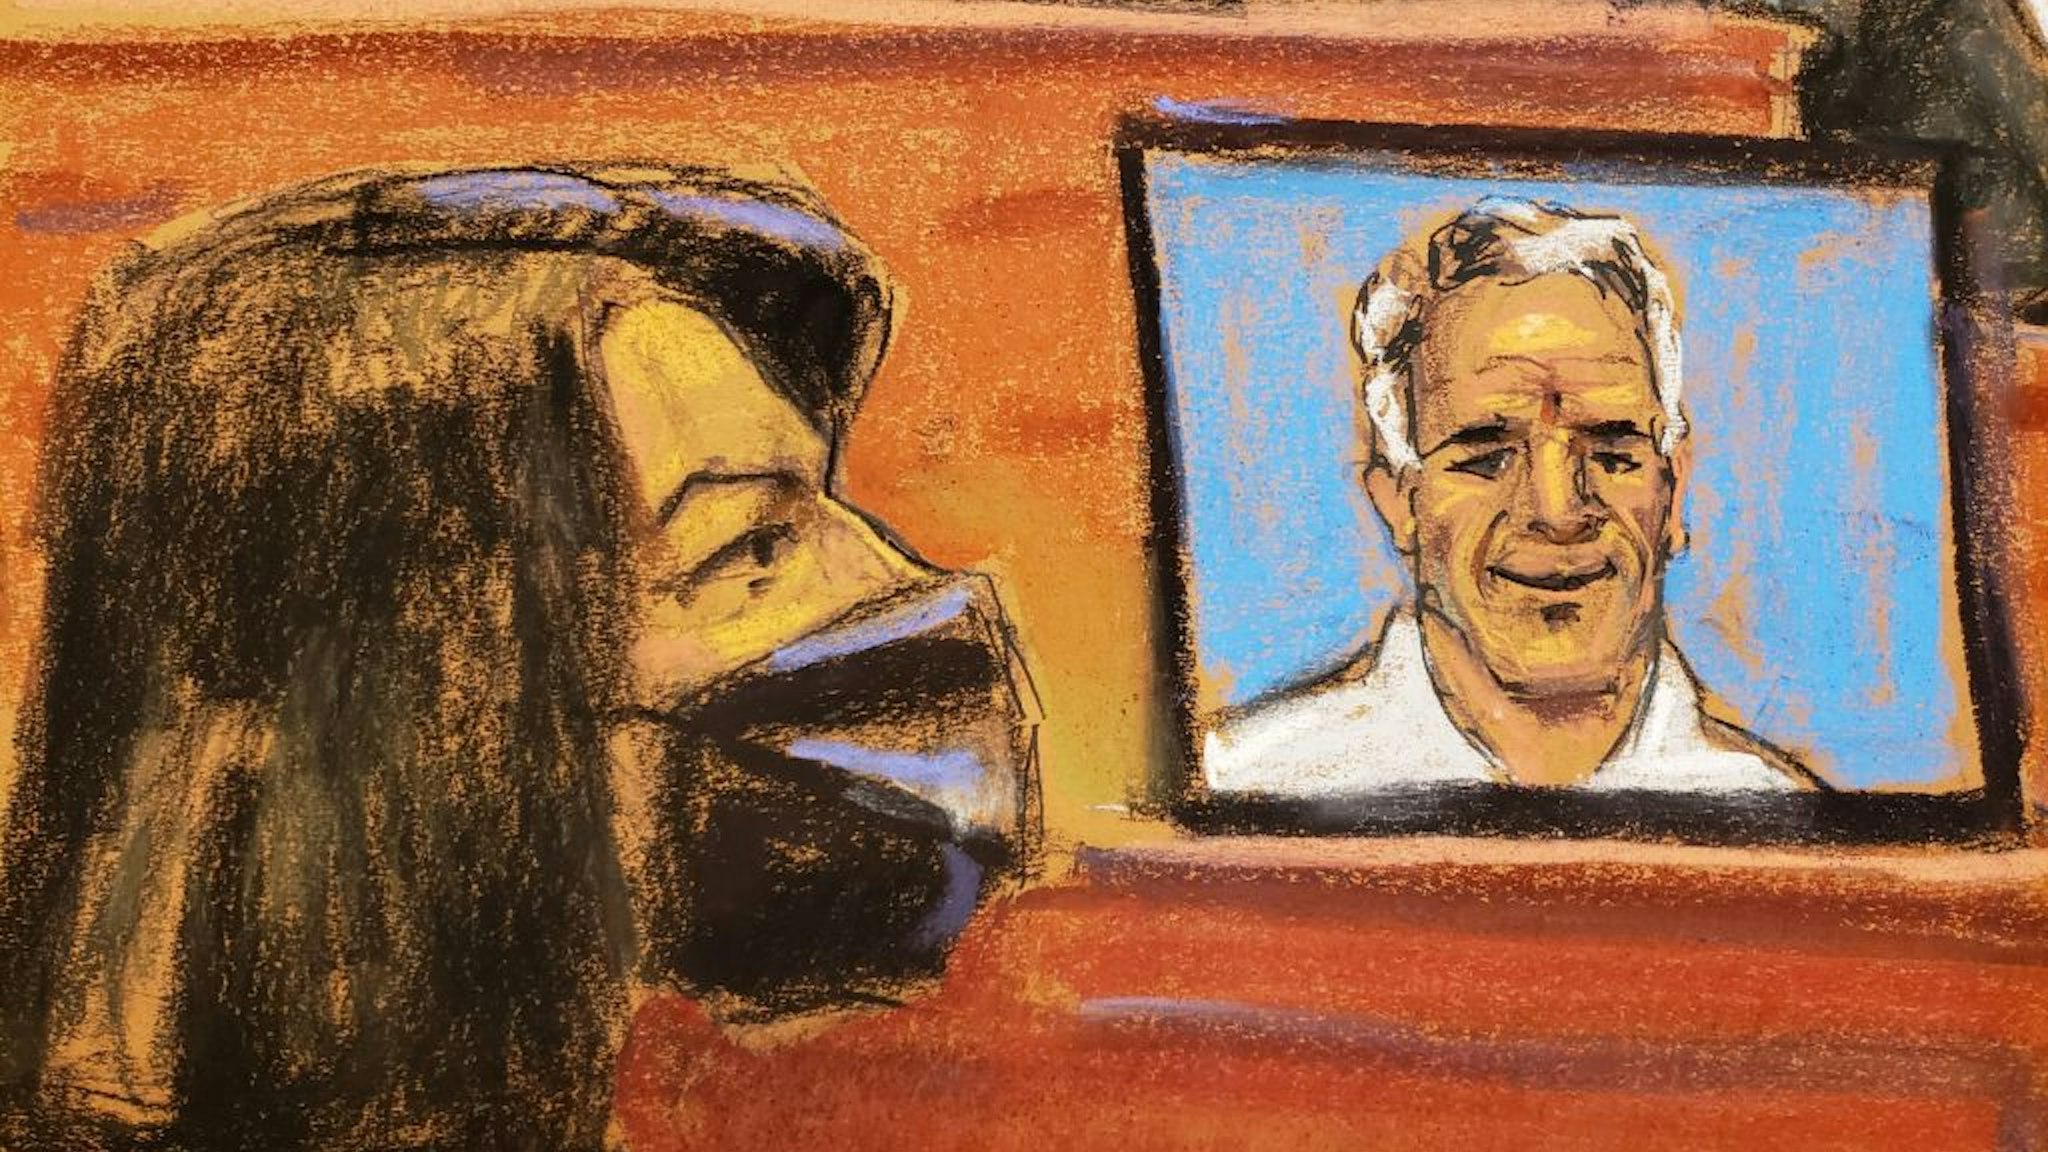 This courtroom sketch shows Ghislaine maxwell during her trial on charges of sex trafficking, in New York City, on December 1, 2021. - The 59-year-old daughter of late newspaper baron Robert Maxwell faces an effective life sentence if convicted in New York of sex trafficking minors for late financier Jeffrey Epstein, her former lover who killed himself in prison over two years ago. The first alleged victim to testify in the sex trafficking trial of Ghislaine Maxwell said in court Tuesday she was 14 when the late US financier Jeffrey Epstein started sexually abusing her, and that the British socialite was sometimes present and even participated. - RESTRICTED TO EDITORIAL USE - MANDATORY MENTION OF THE ARTIST UPON PUBLICATION - TO ILLUSTRATE THE EVENT AS SPECIFIED IN THE CAPTION - NO MARKETING NO ADVERTISING CAMPAIGNS - DISTRIBUTED AS A SERVICE TO CLIENTS - NO ARCHIVE - (Photo by Jane Rosenberg / AFP) / RESTRICTED TO EDITORIAL USE - MANDATORY MENTION OF THE ARTIST UPON PUBLICATION - TO ILLUSTRATE THE EVENT AS SPECIFIED IN THE CAPTION - NO MARKETING NO ADVERTISING CAMPAIGNS - DISTRIBUTED AS A SERVICE TO CLIENTS - NO ARCHIVE - / RESTRICTED TO EDITORIAL USE - MANDATORY MENTION OF THE ARTIST UPON PUBLICATION - TO ILLUSTRATE THE EVENT AS SPECIFIED IN THE CAPTION - NO MARKETING NO ADVERTISING CAMPAIGNS - DISTRIBUTED AS A SERVICE TO CLIENTS - NO ARCHIVE - (Photo by JANE ROSENBERG/AFP via Getty Images)